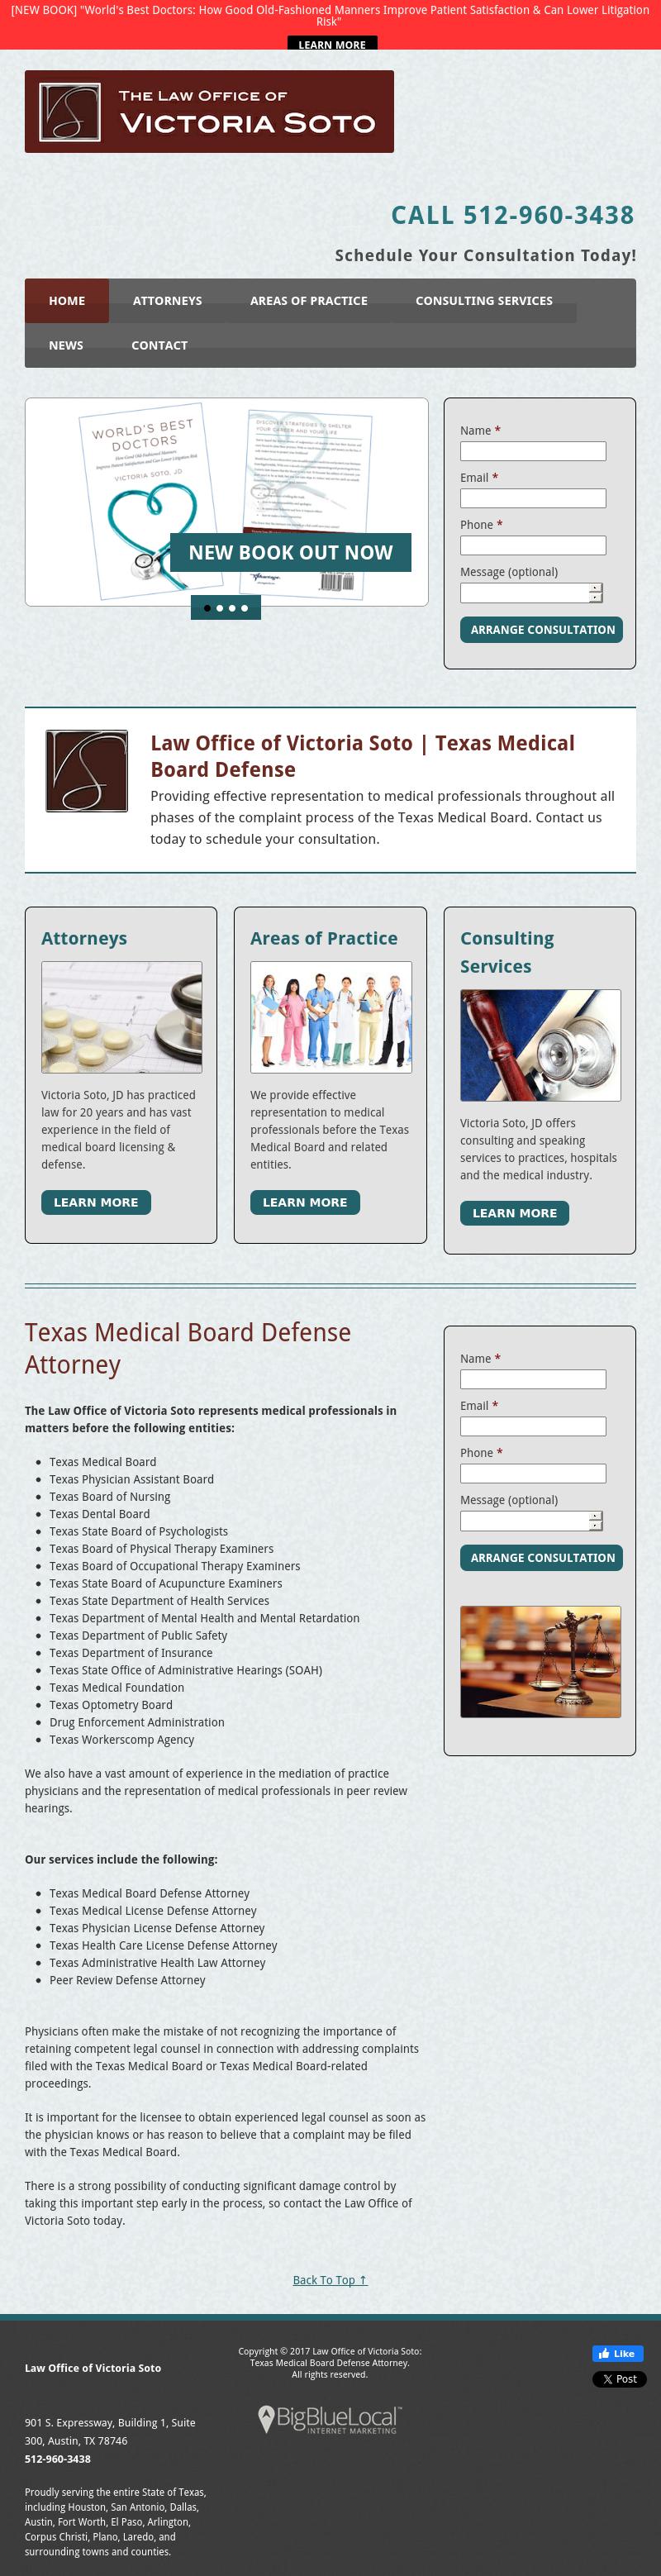 Law Office of Victoria Soto - Austin TX Lawyers